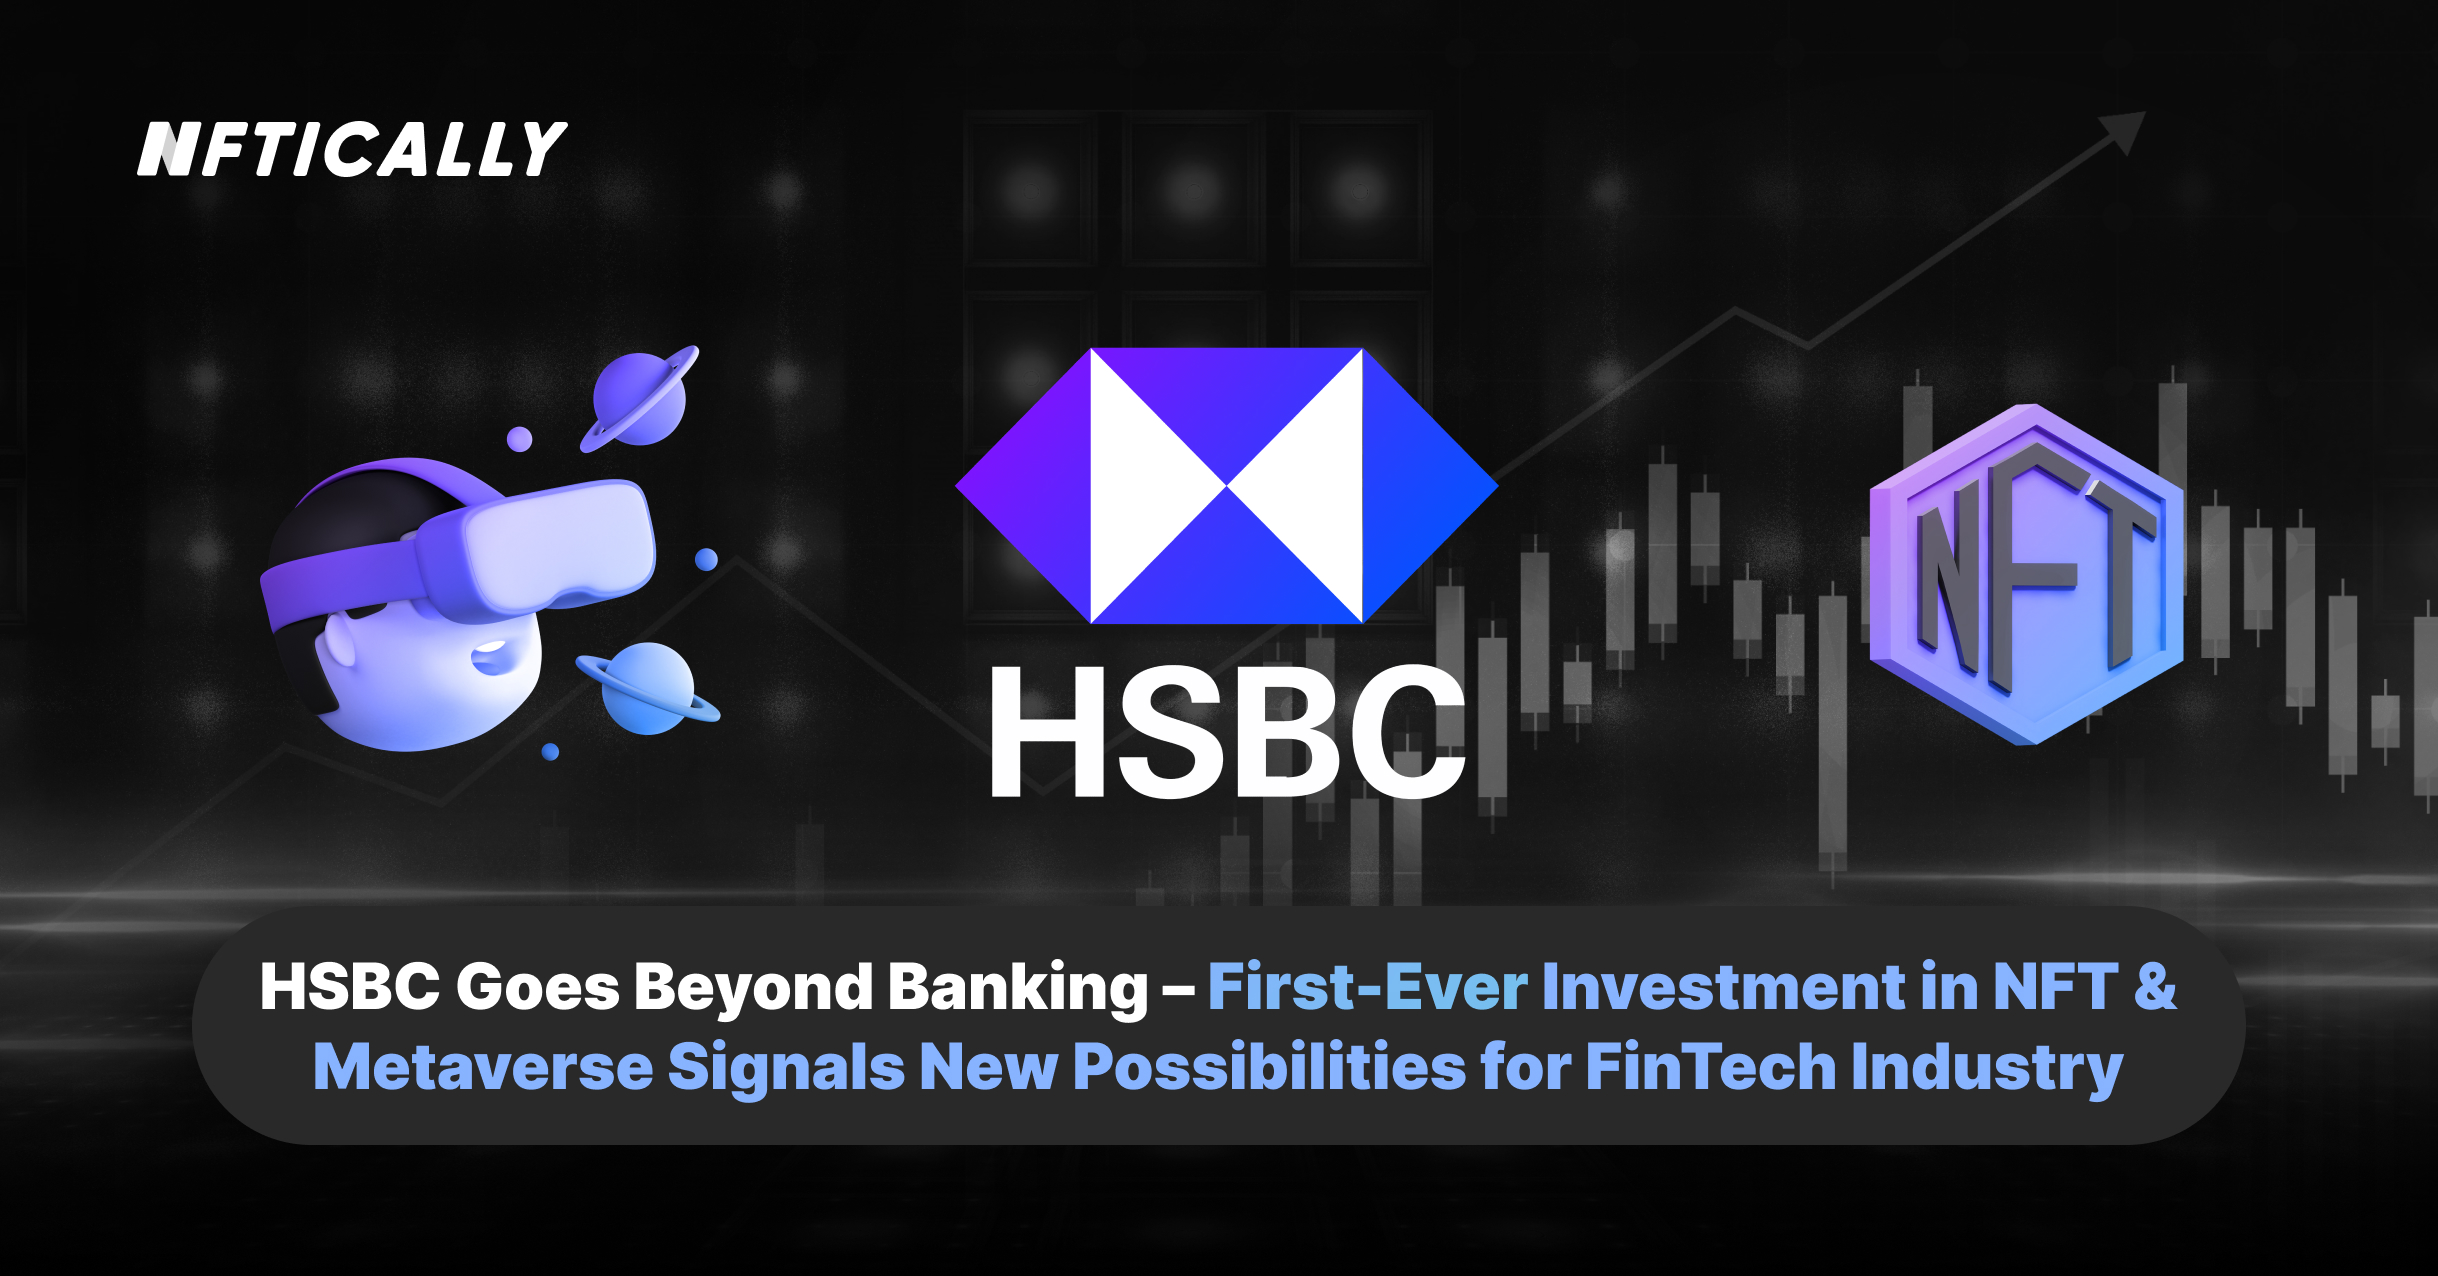 HSBC Goes Beyond Banking – First-Ever Investment in NFT & Metaverse Signals New Possibilities for FinTech Industry